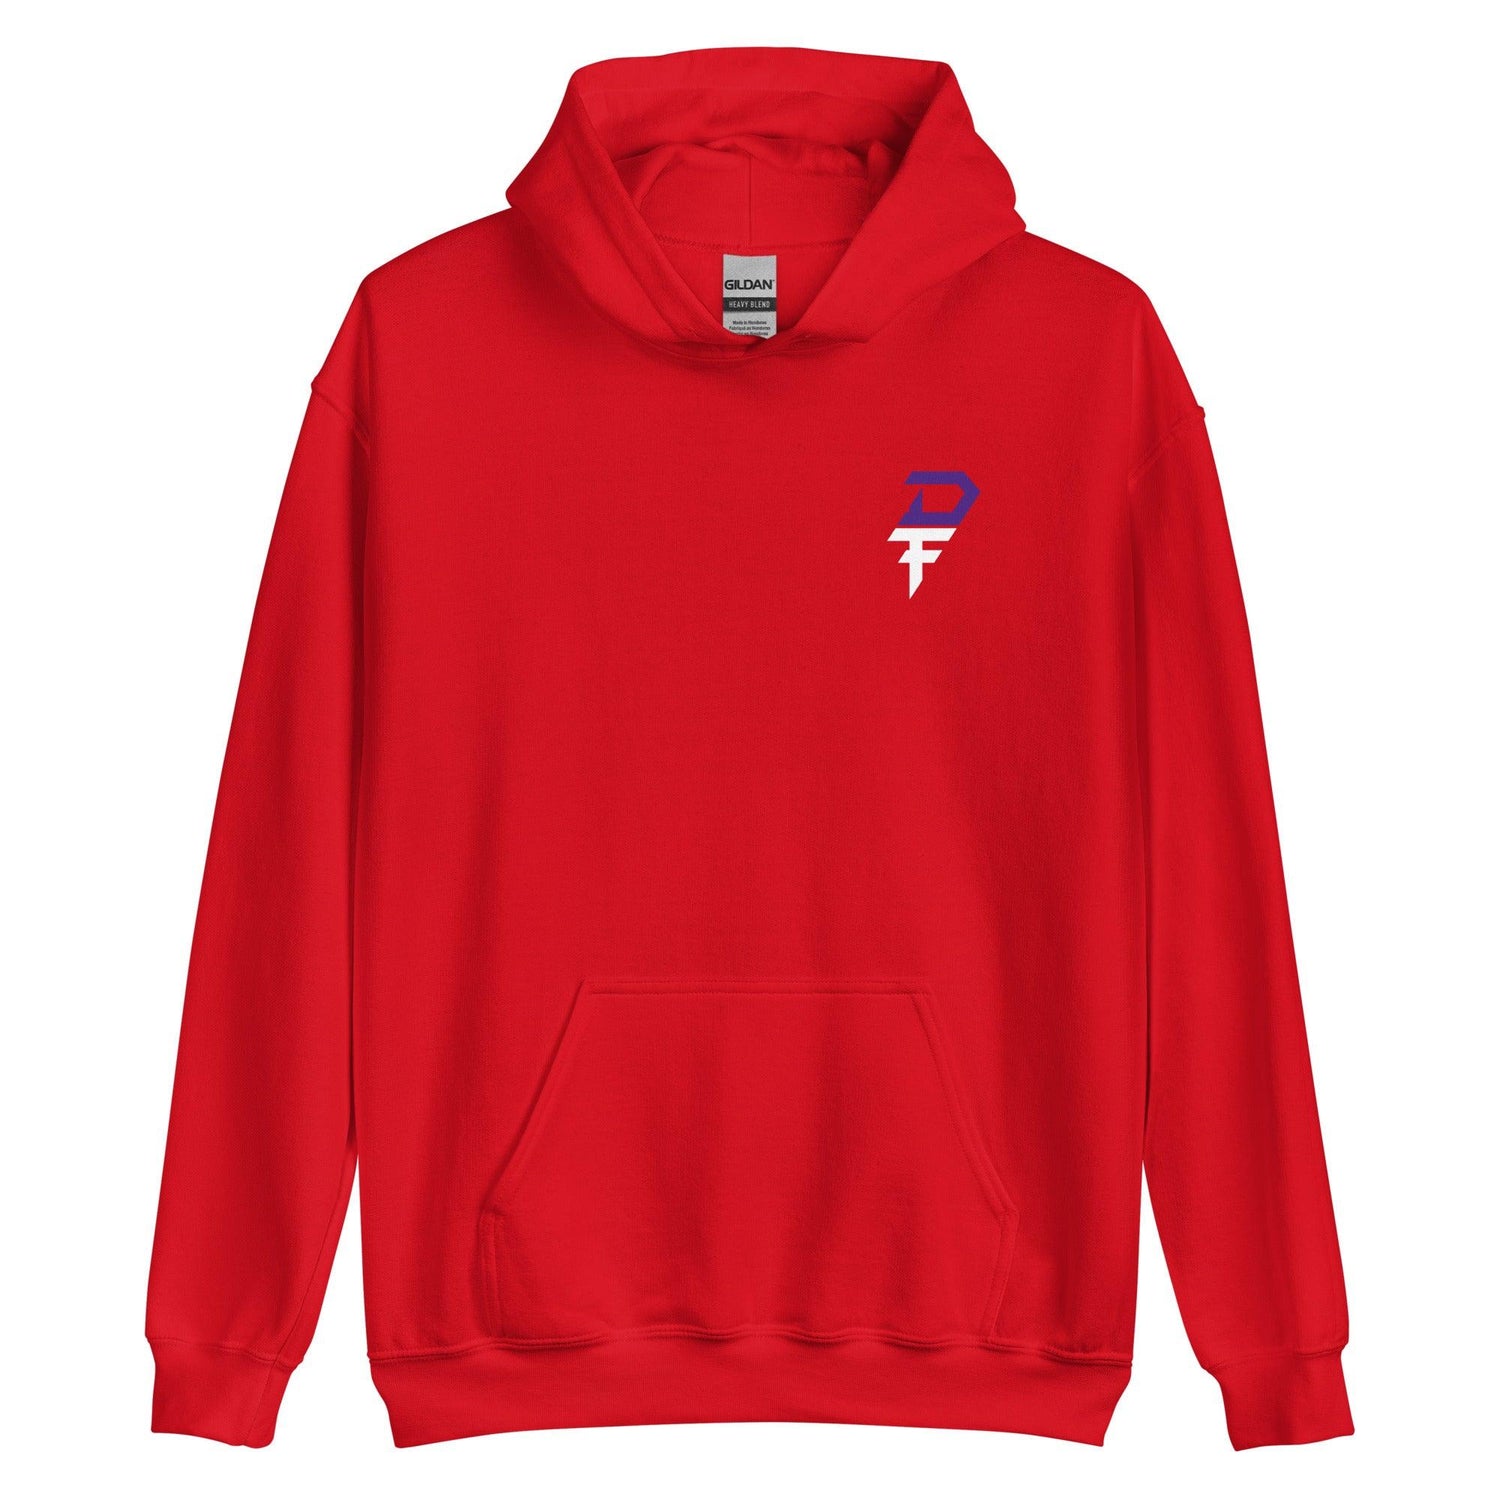 Dorian Finister "Essential" Hoodie - Fan Arch